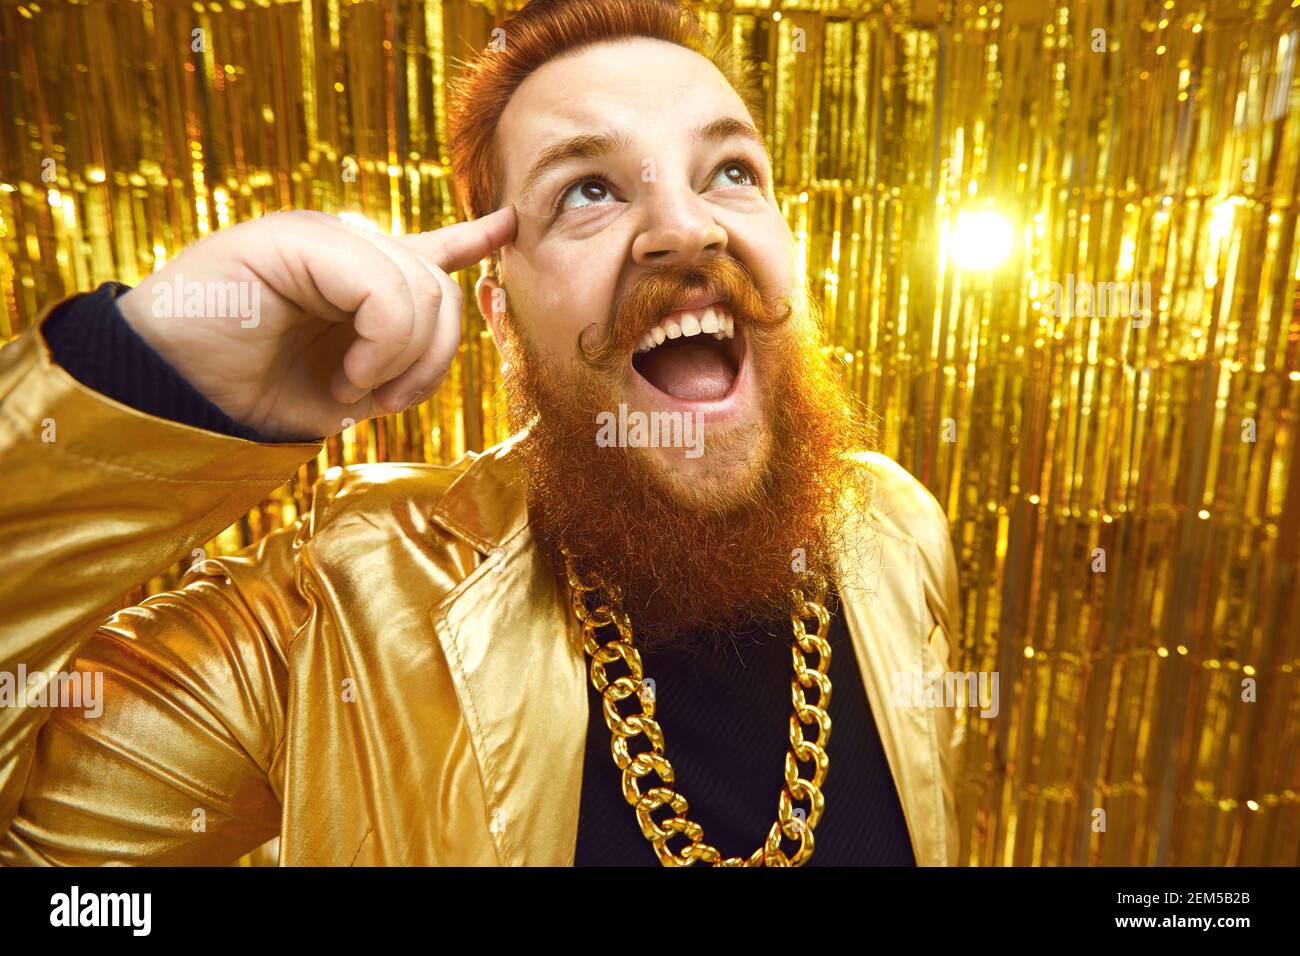 Excited bearded man in extravagant outfit with gold chain necklace having fun at a party Stock Photo